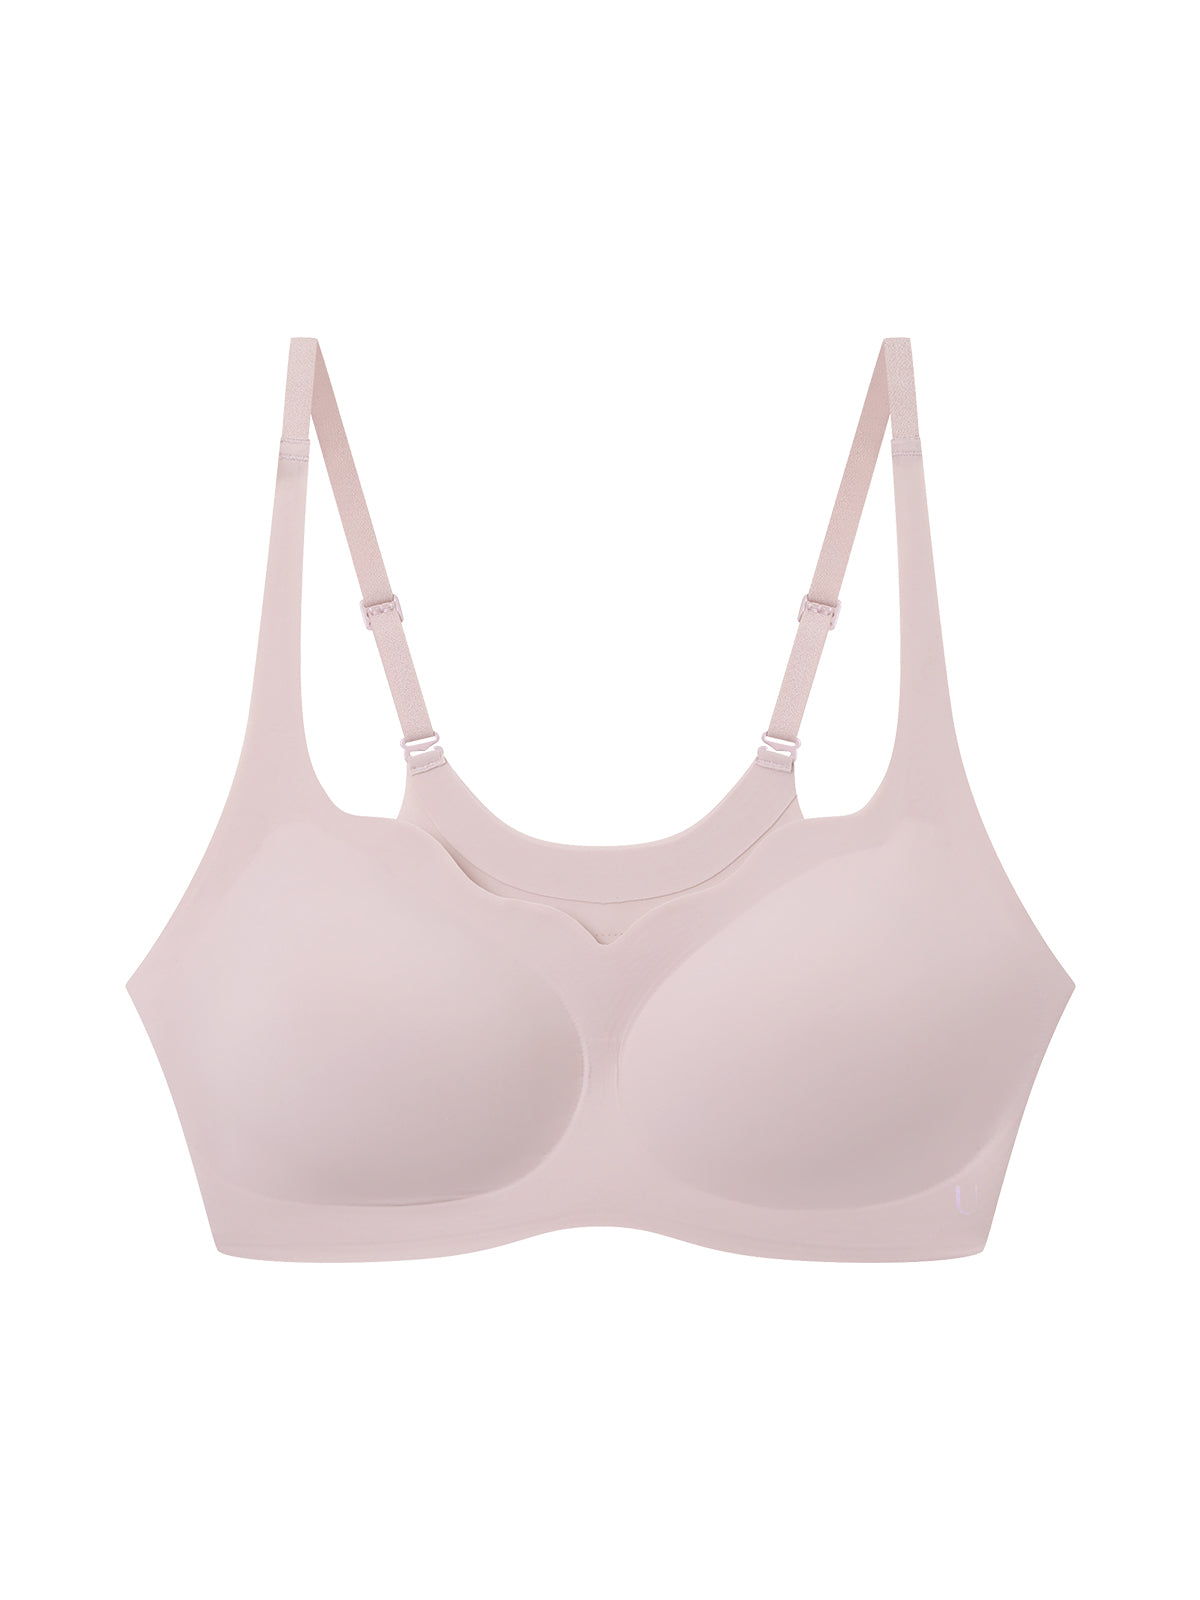 Buy VSTAR ISA Women's Cotton Blend Wireless Padded Bra with Additional  Detachable Transparent Straps at